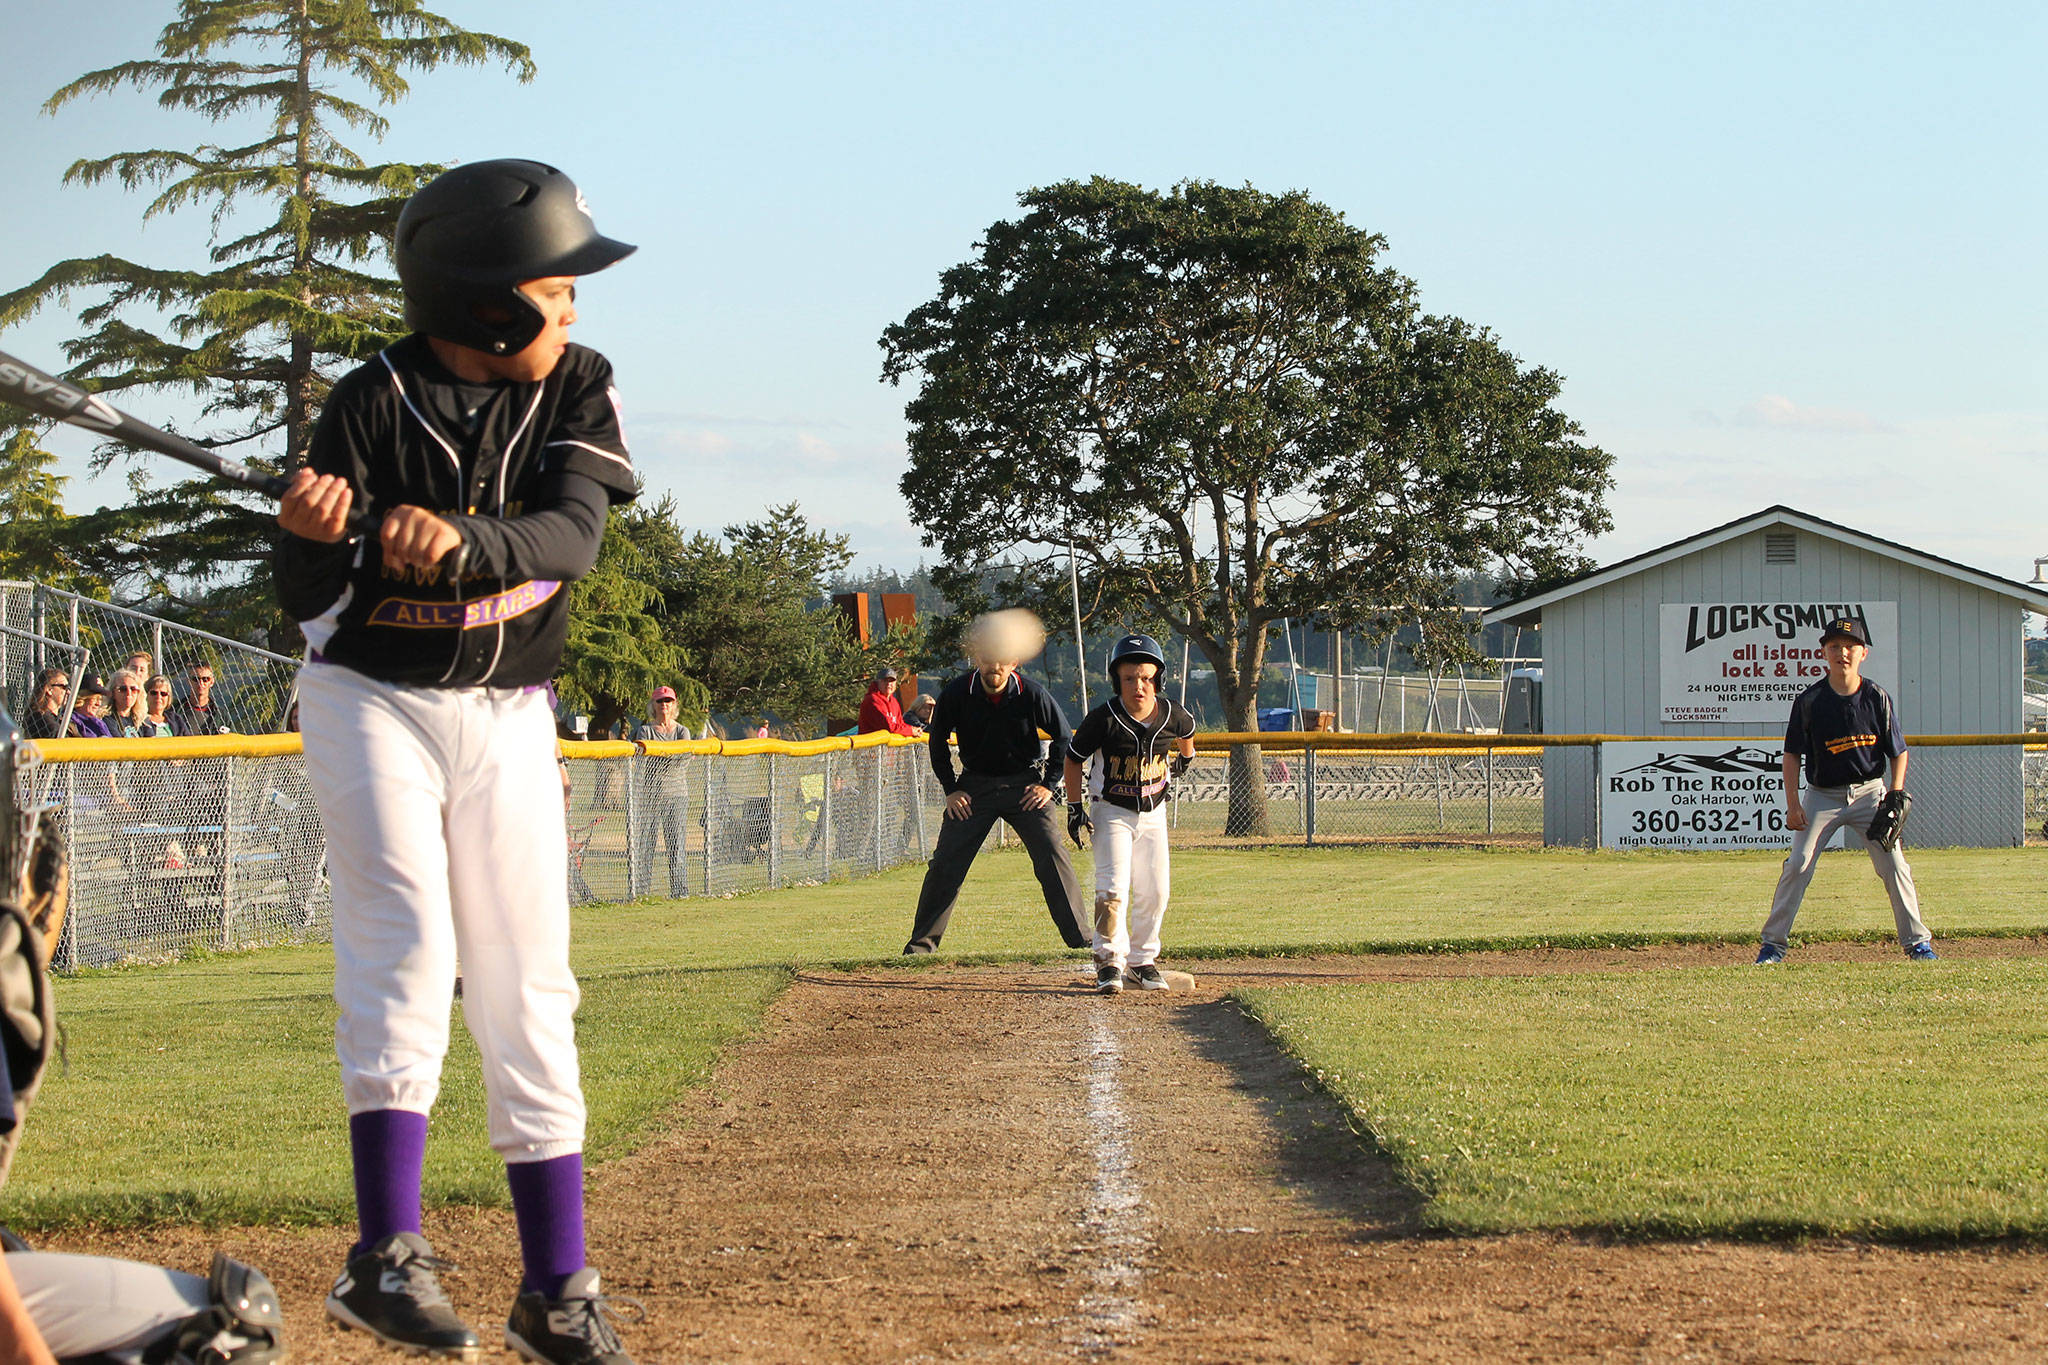 North Whidbey’s Nikko Gonzales dodges an inside pitch with teammate Easton Burton perched on third. Gonzales eventually drove in Burton in the sixth inning during North Whidbey’s rally. (Photo by Jim Waller/Whidbey News-Times)